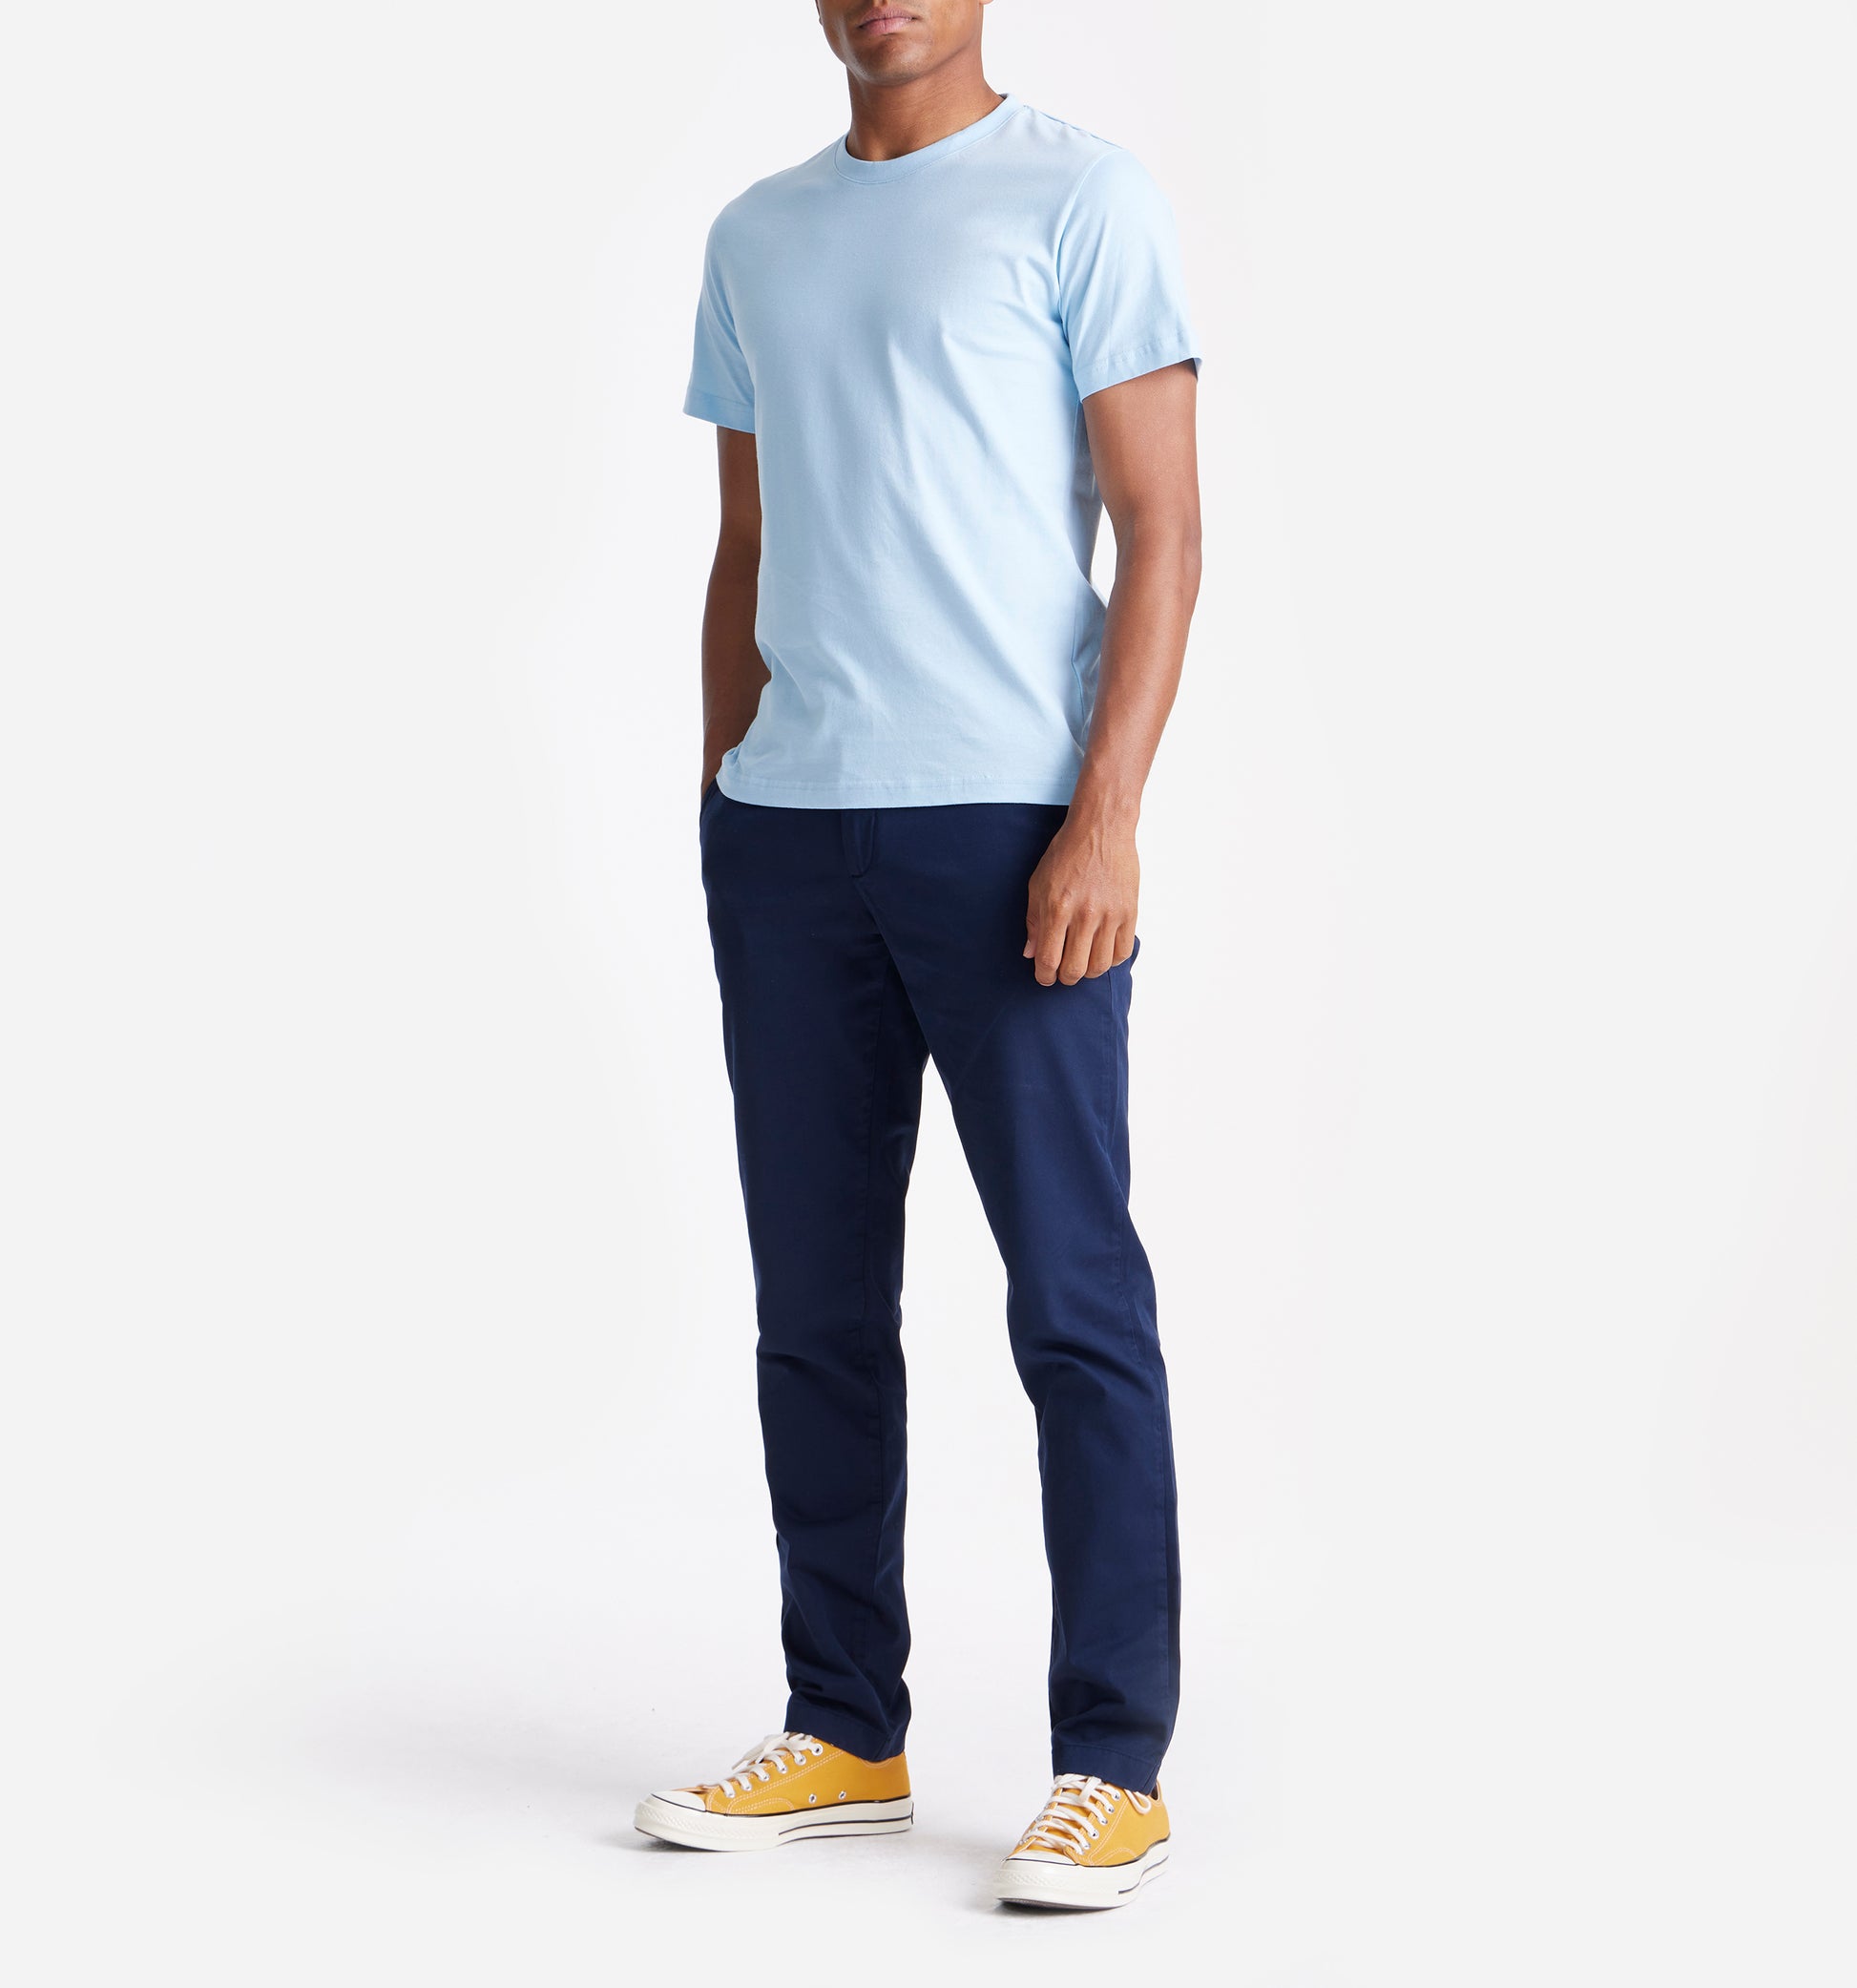 The Steve - Basic Cotton T-shirt In Light Blue From King Essentials